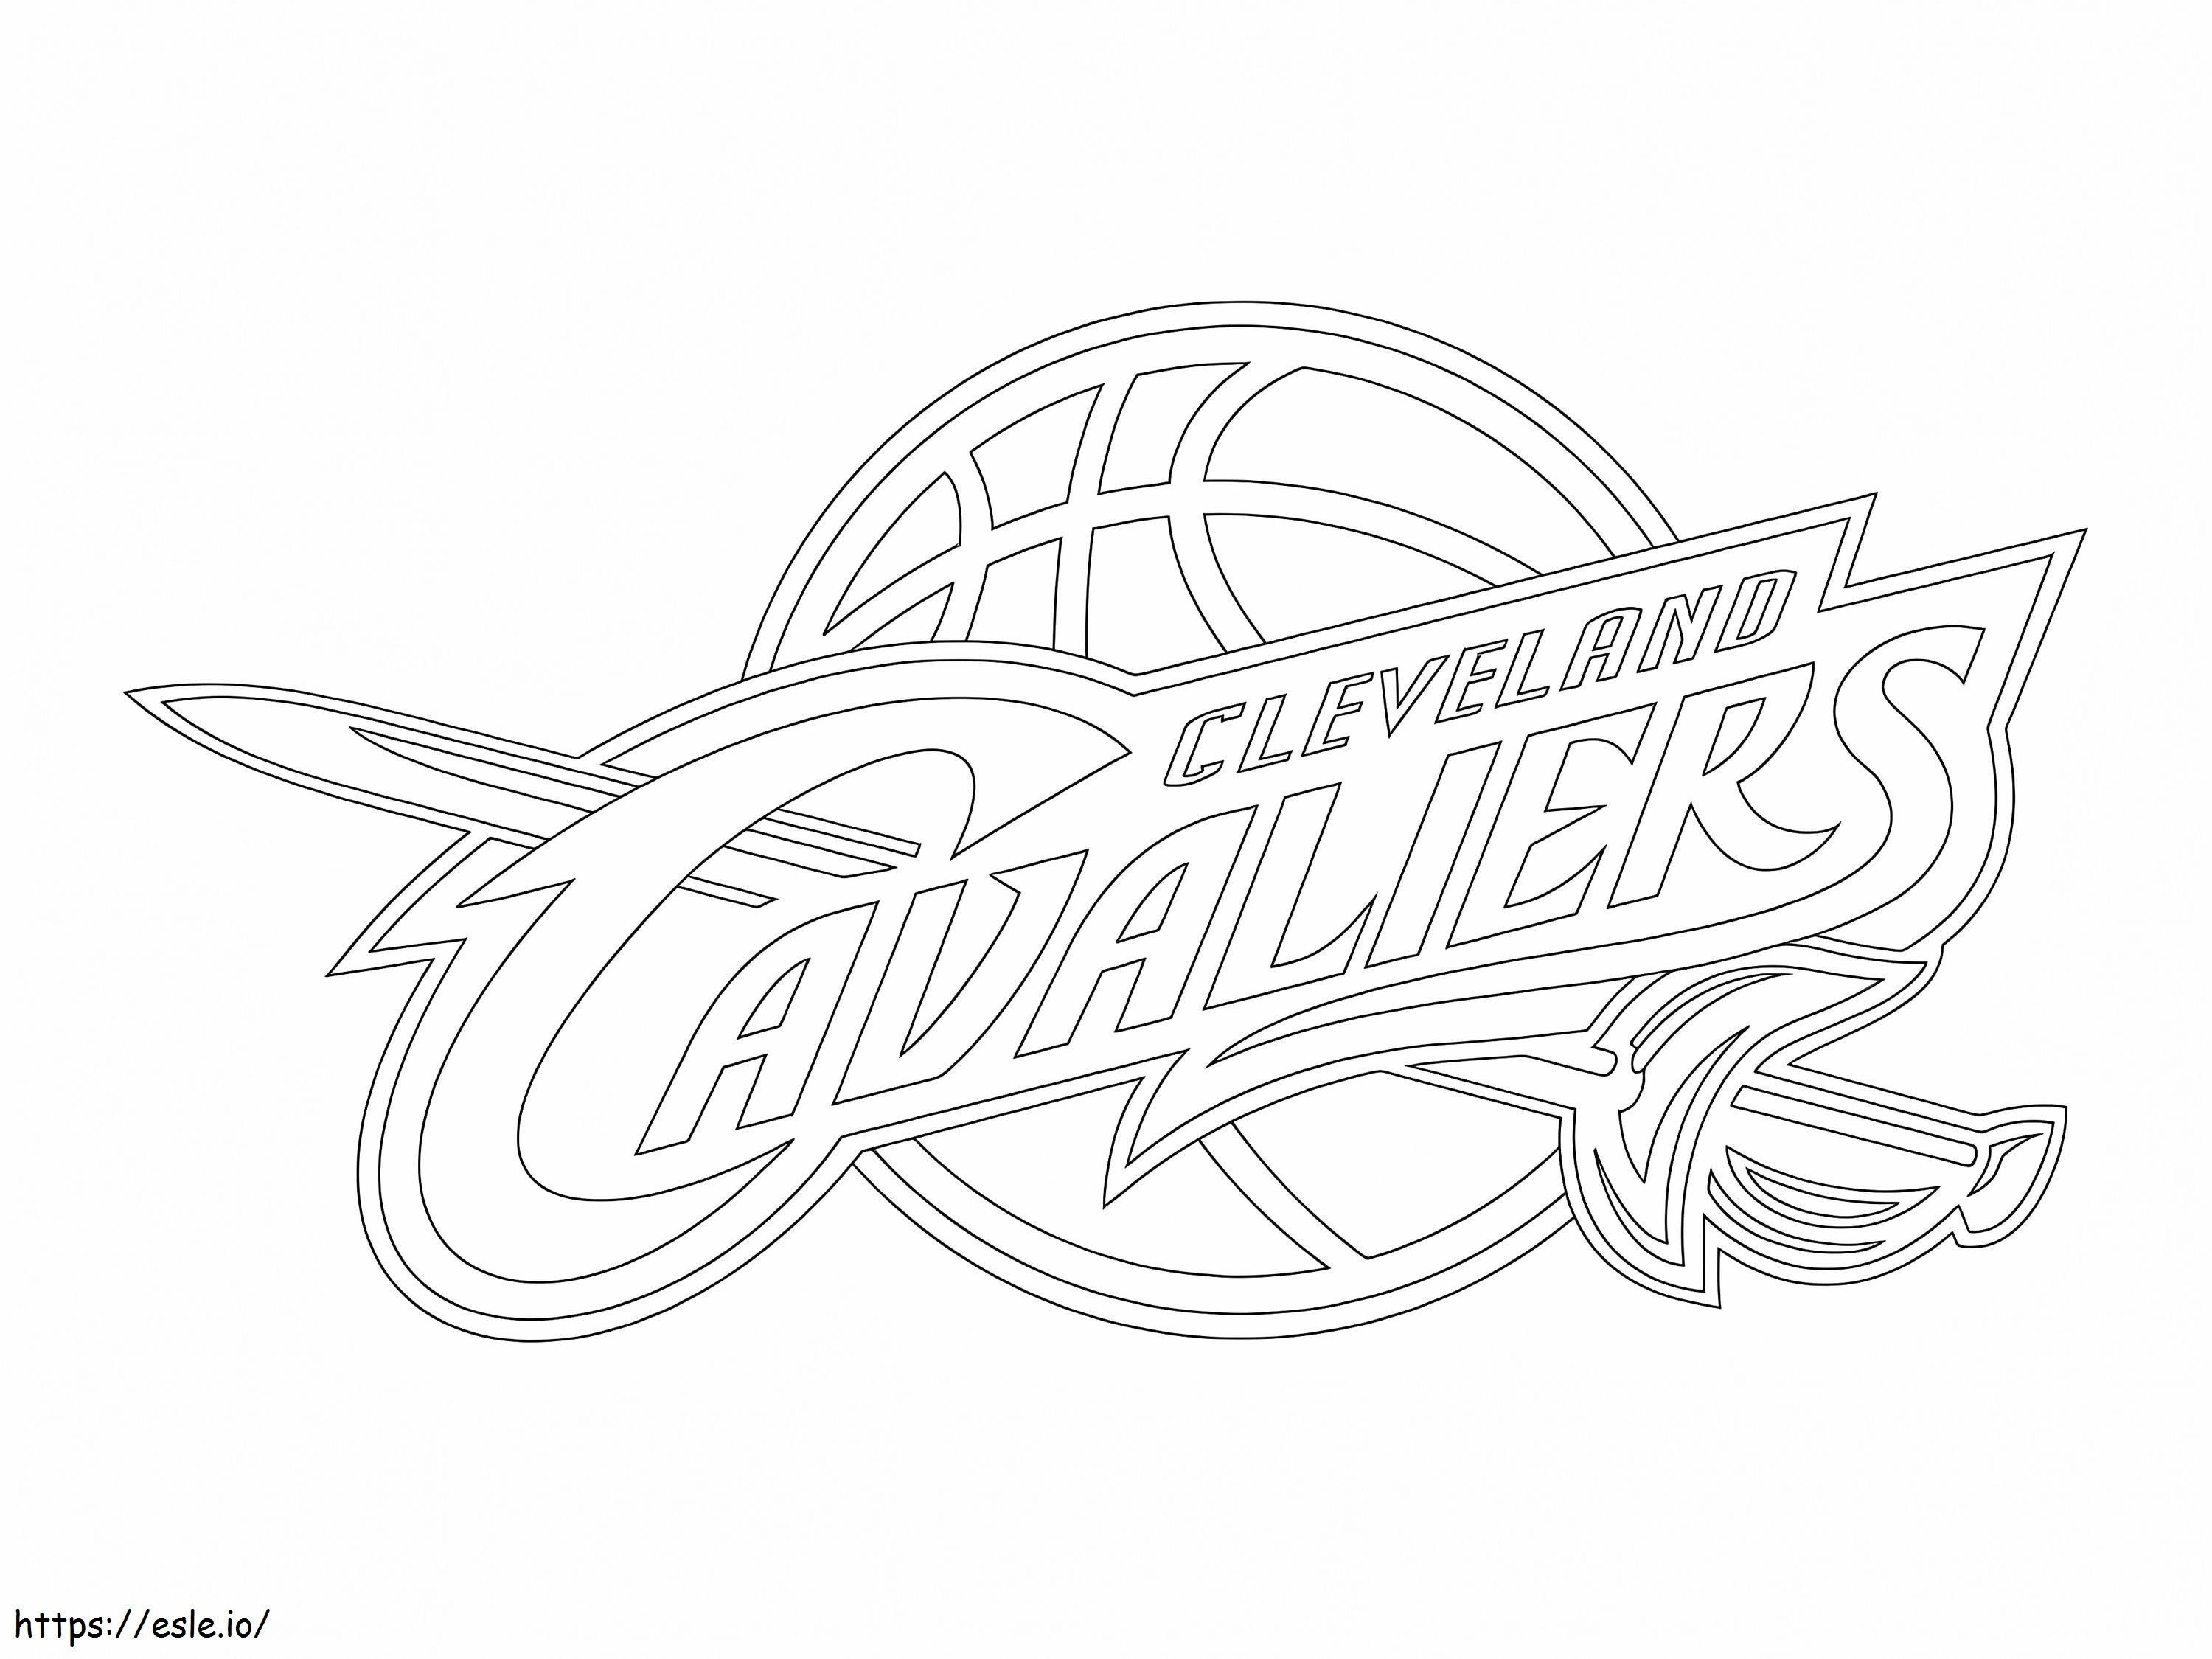 Cleveland Cavaliers Logo coloring page